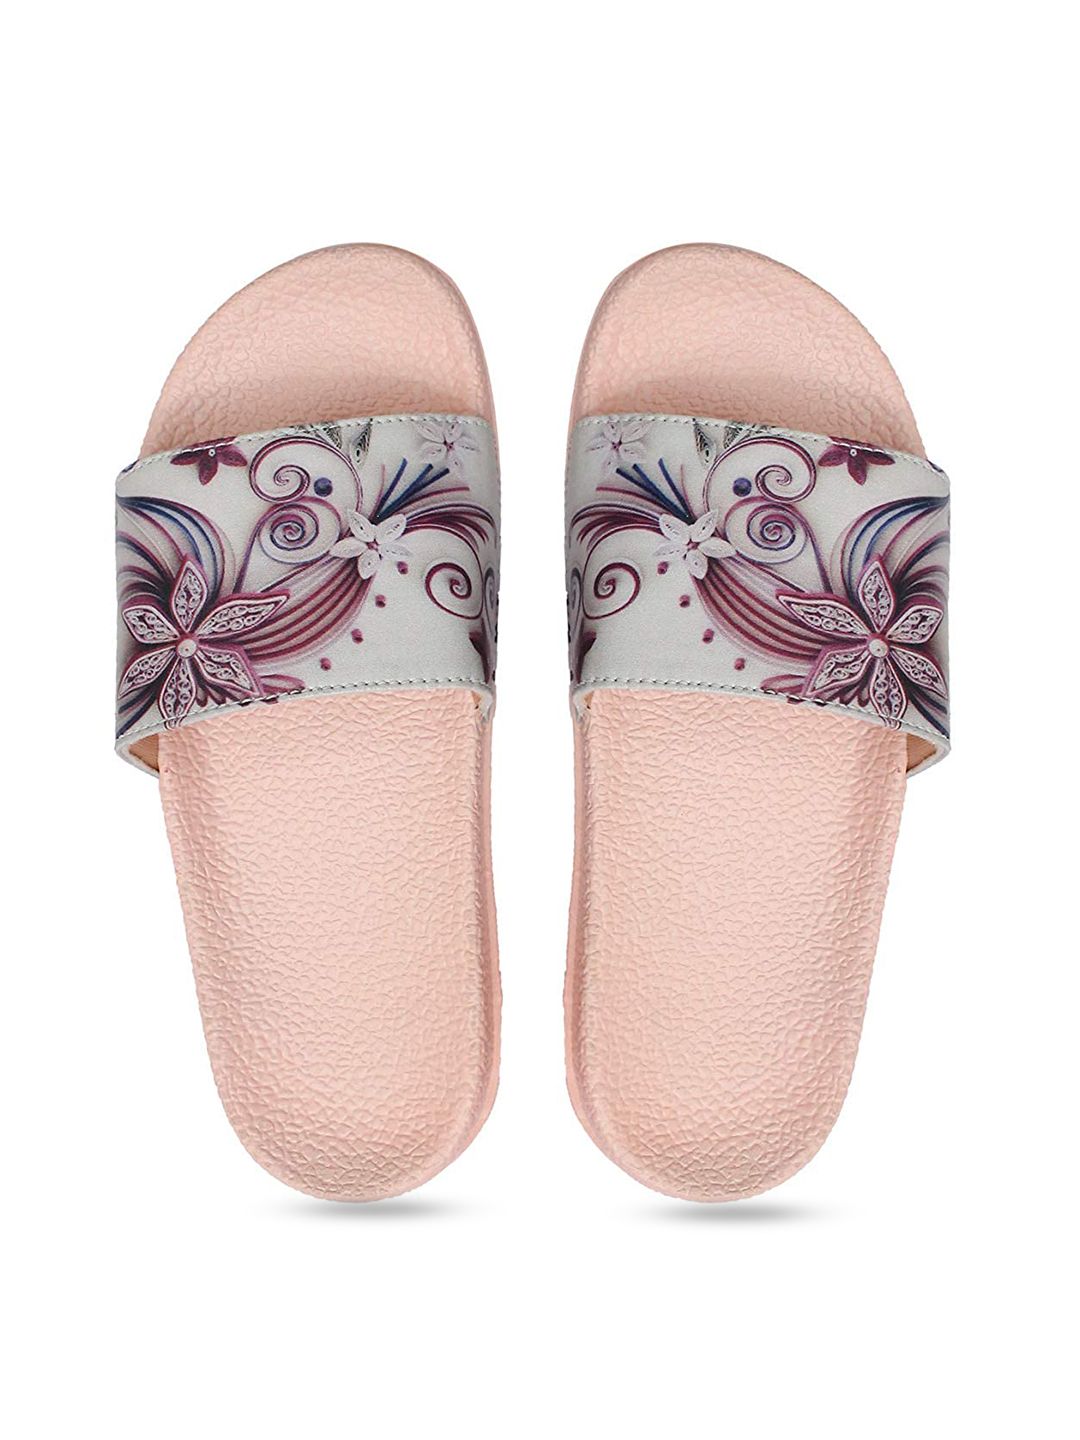 ADIVER Women Pink & Blue Printed Sliders Price in India